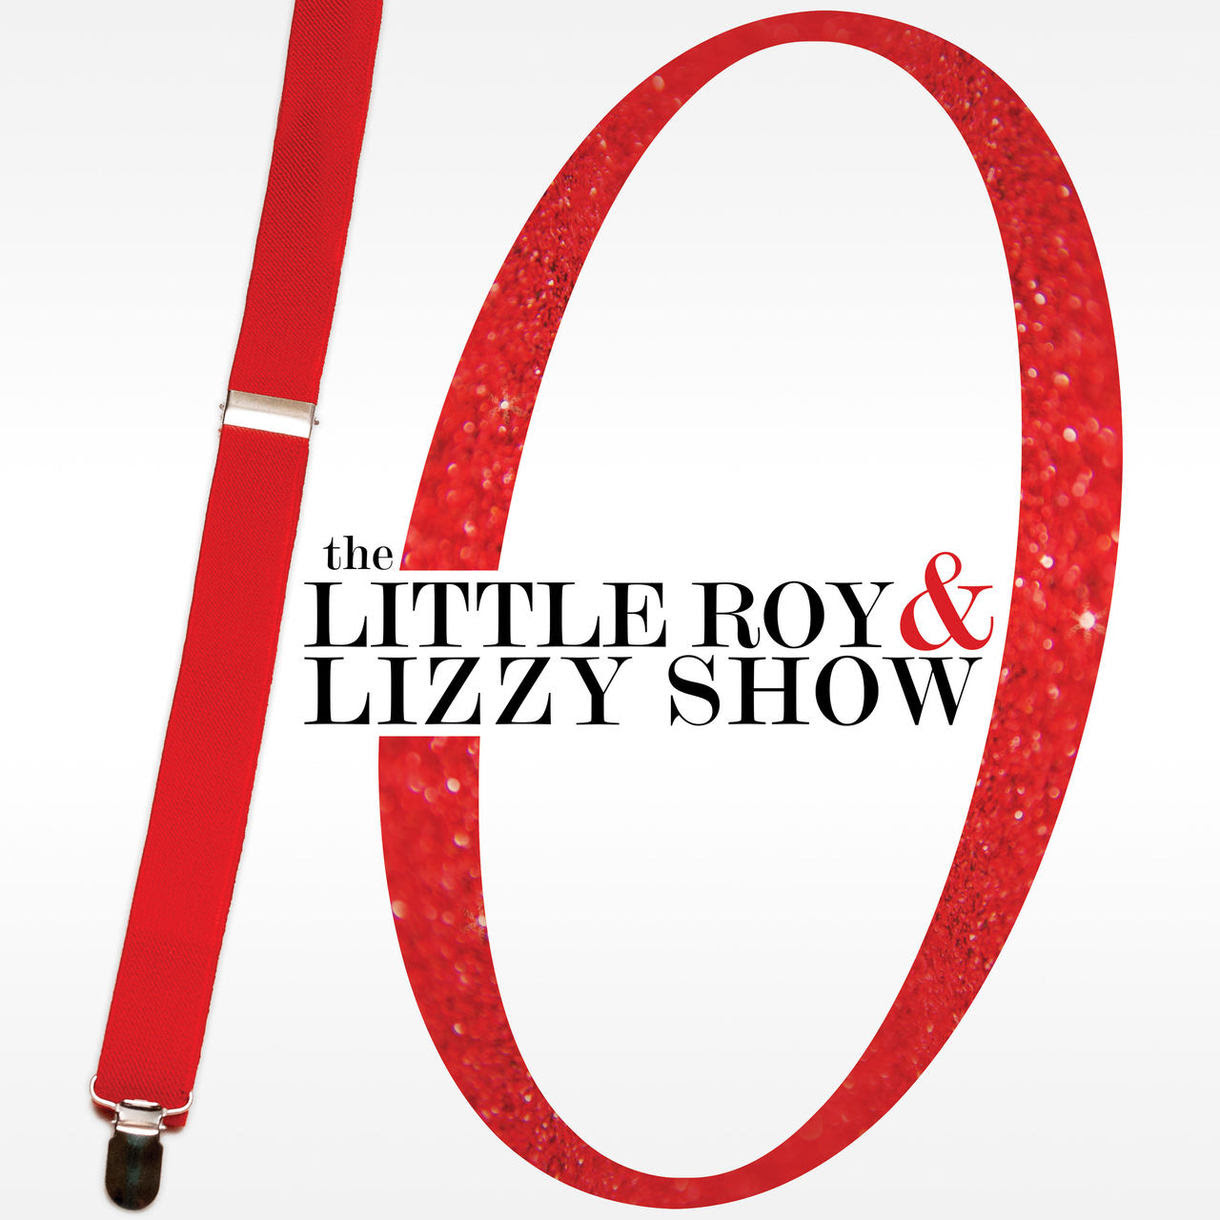 The Little Roy & Lizzy Show Celebrates 10 Years